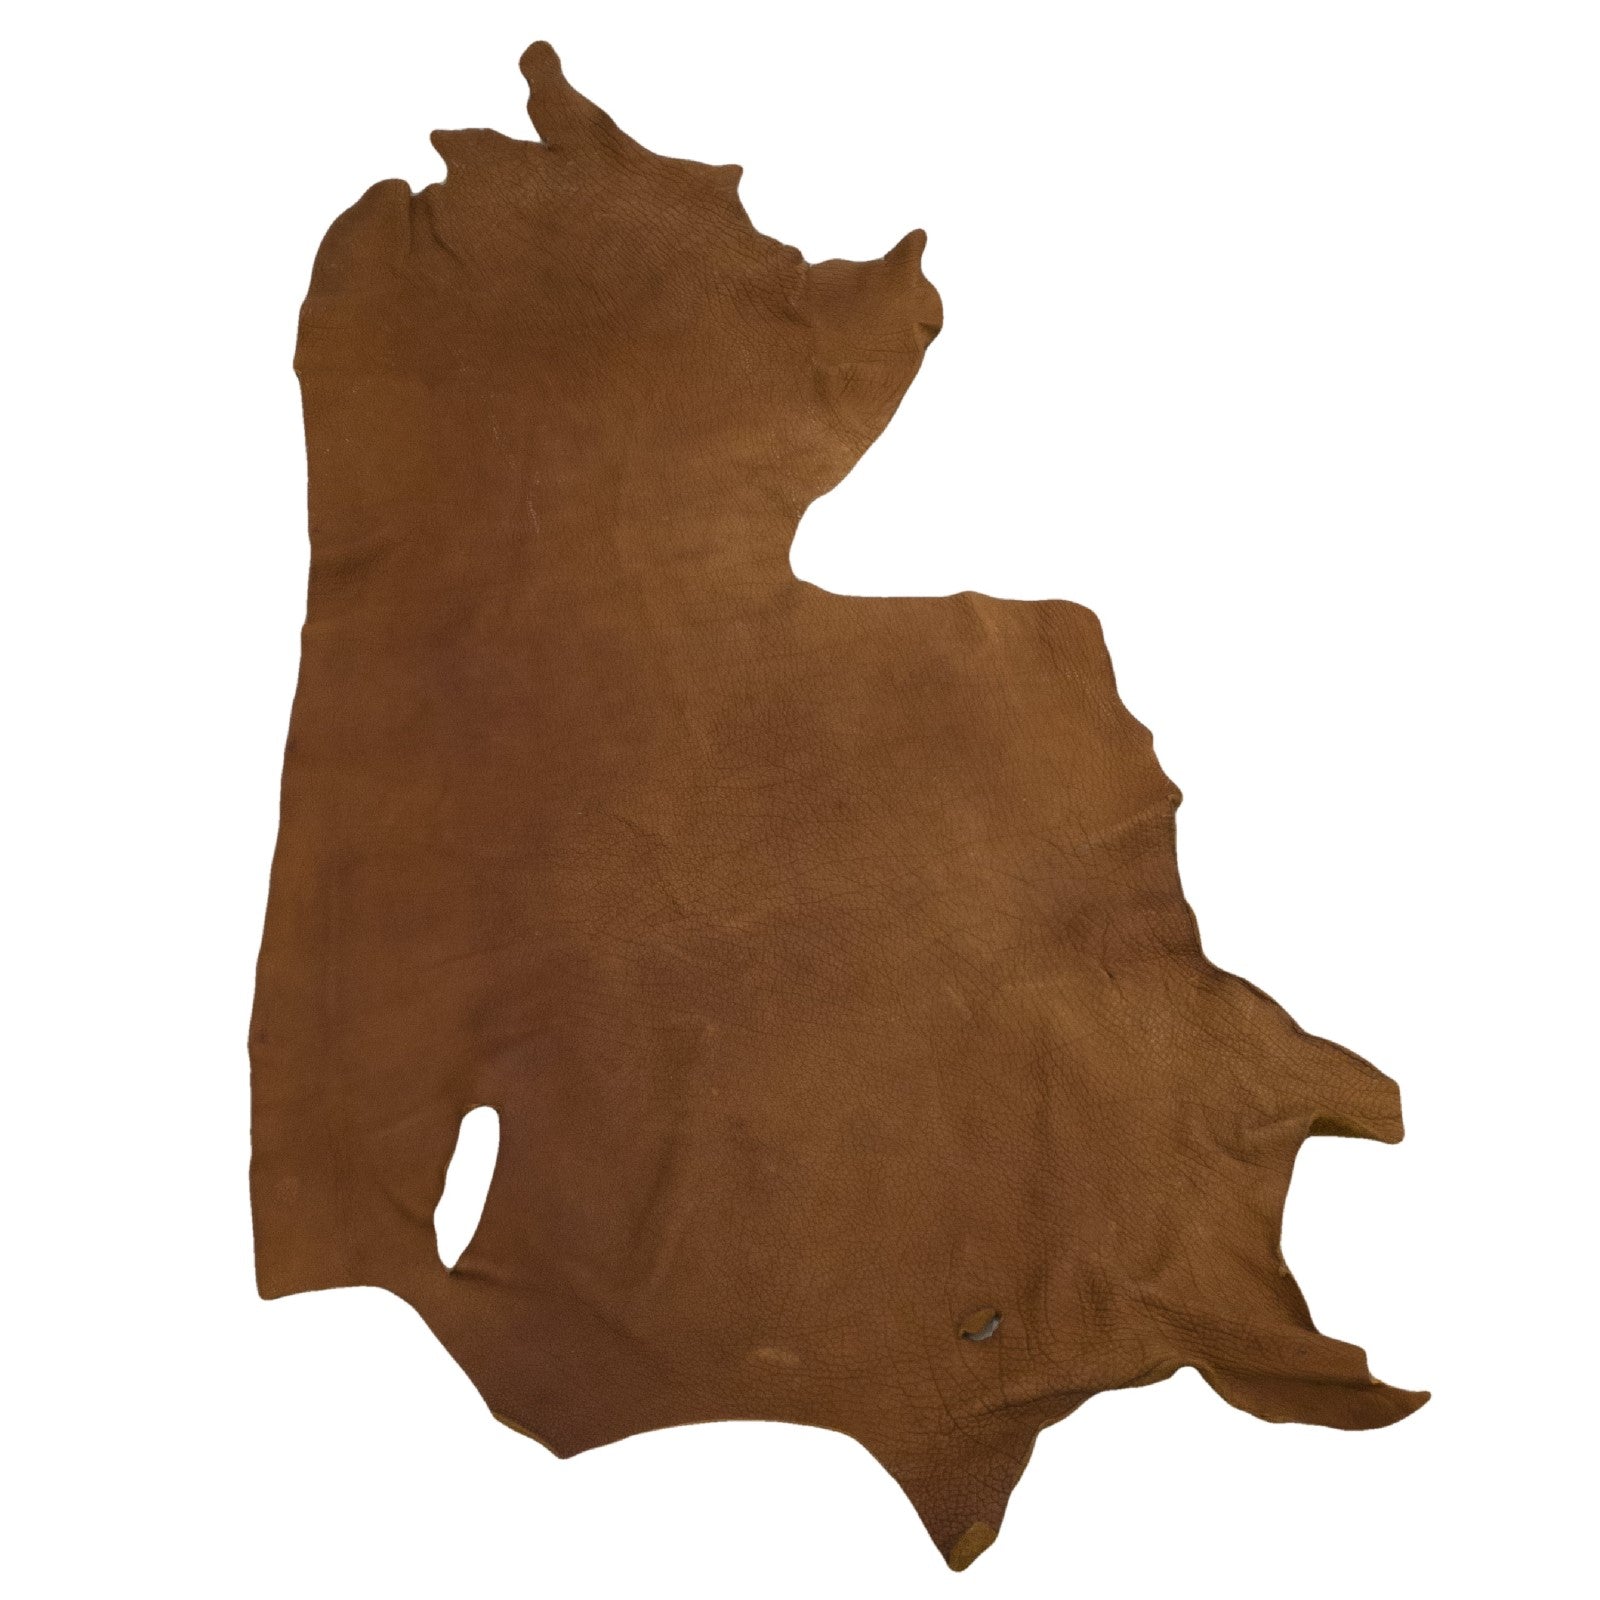 Toasted Brown, 5-7 oz, 15-17 Sq Ft, Bison Sides, 15-17 Sq Ft | The Leather Guy